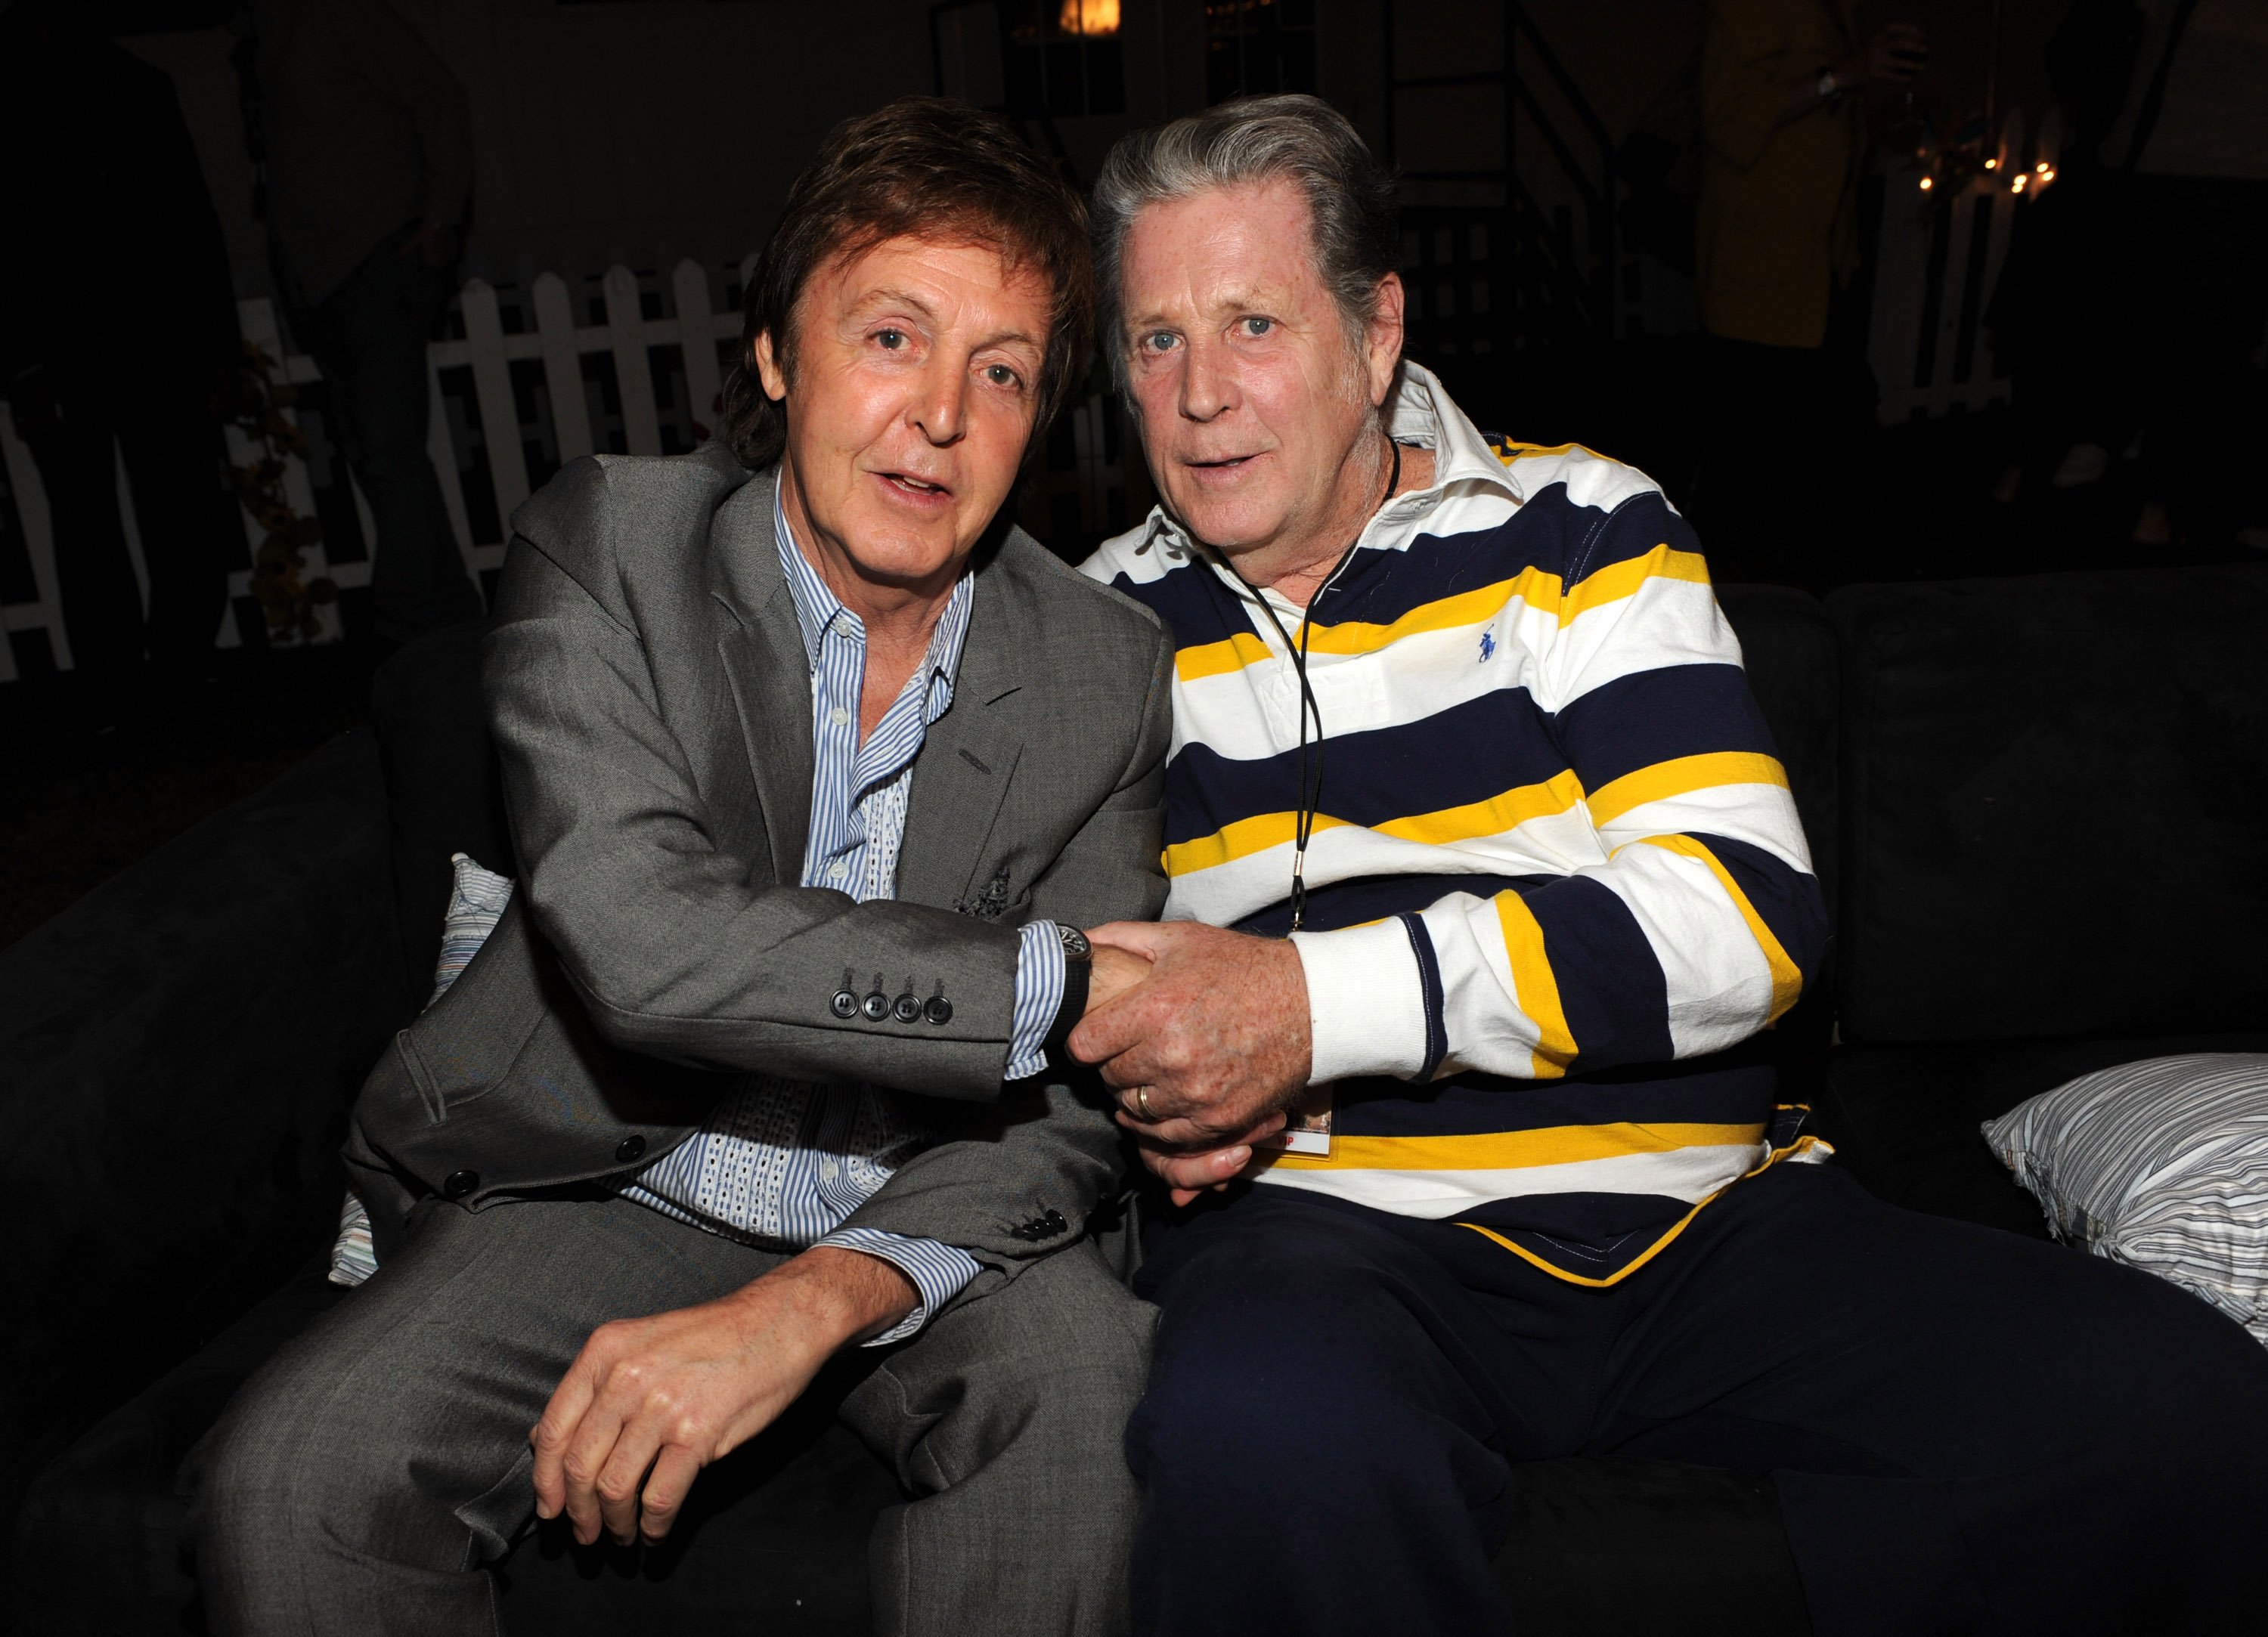 Paul McCartney and Brian Wilson sit next to each other and shake hands.